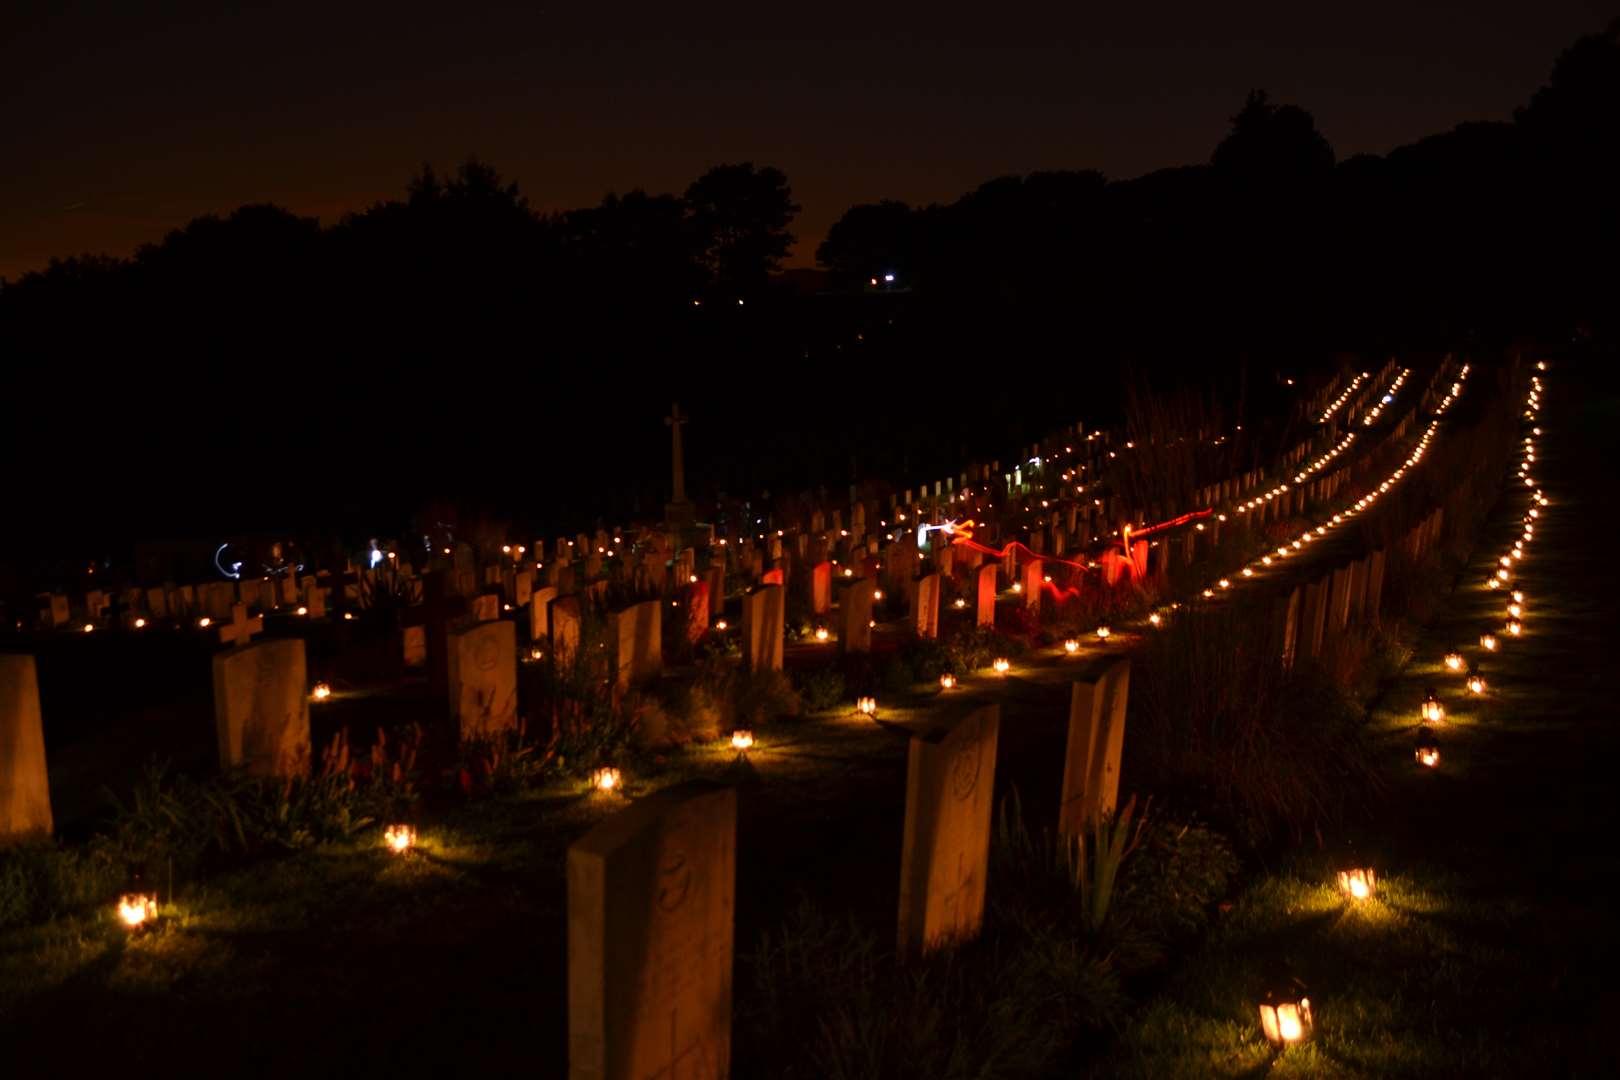 Hundreds of lanterns placed on the graves of the fallen at Shorncliff Military Cemetery